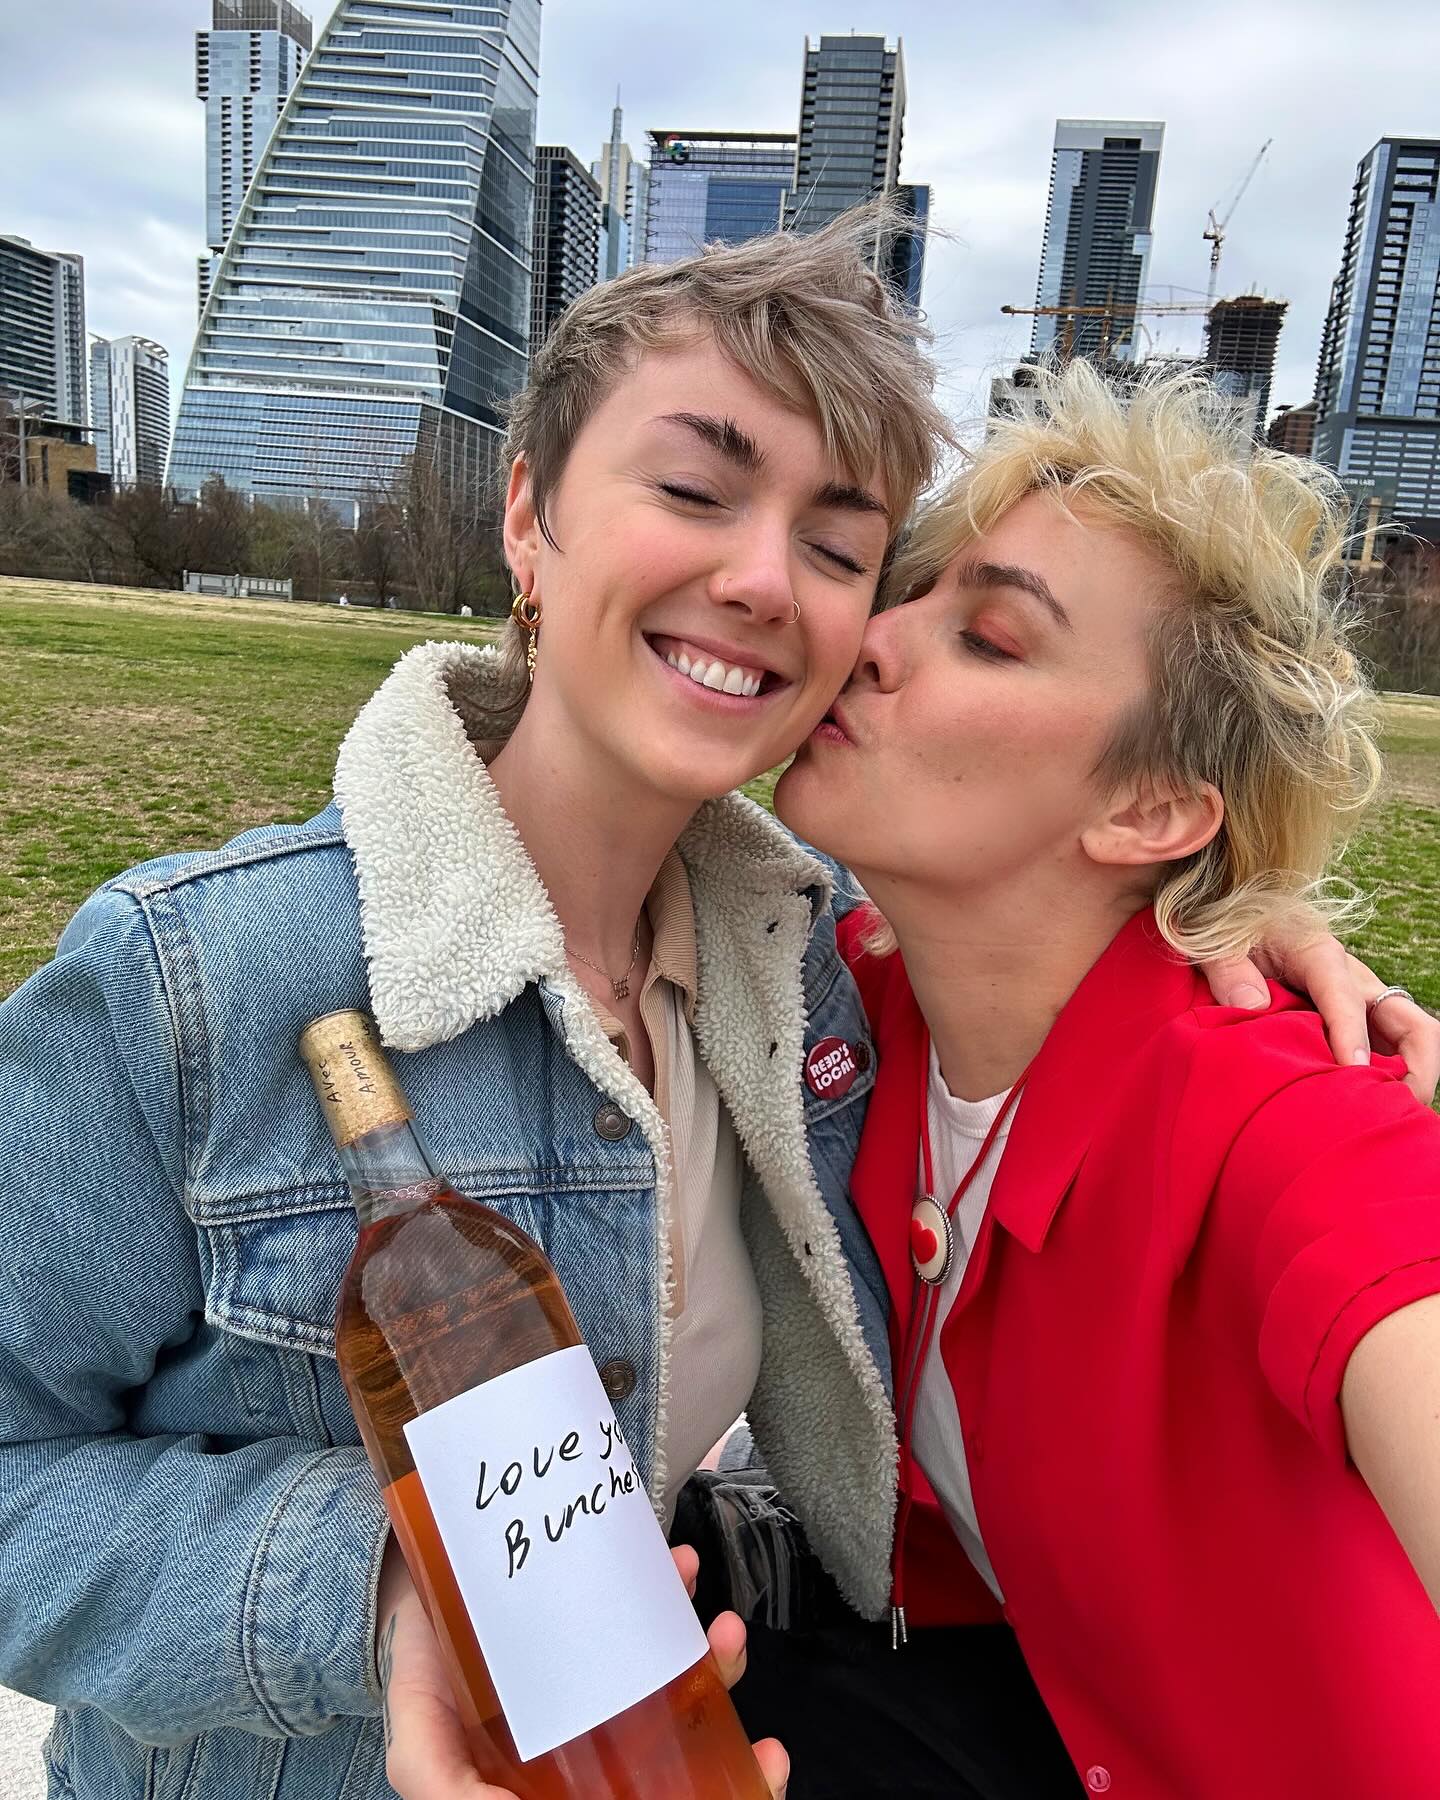 Just a couple of puppies at the dog park.
#loveyoubunches 
•••••••••••••••••••••••••••••••••••••••••••••••••••••••••••••
#photooftheday #portraitmode #fujifilm #instax #polaroid #frenchwine #valentine #picnic #mulletgang #pixiemullet #mua #wlw #lgbt #lesbos #girlfriends #girlswithtattoos #longdistance #missingyou #sapphicyearning #natural #nature #followyourheart #austin #texas #cowgirls #strapup